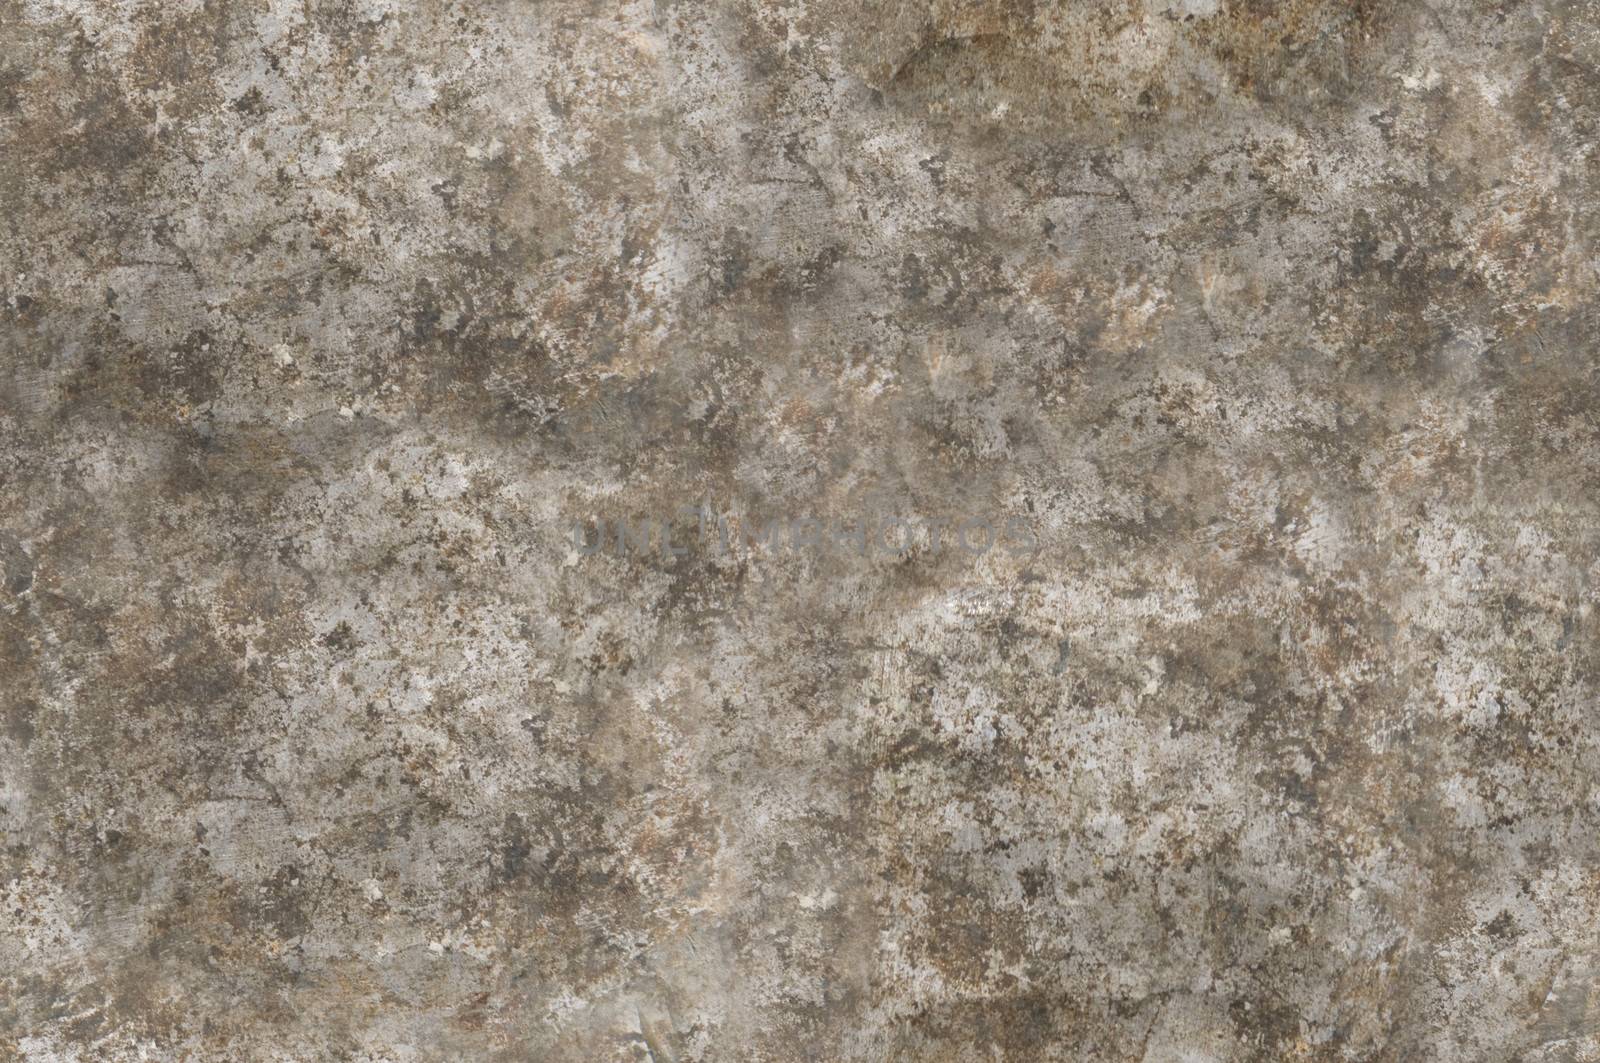 Distressed gray metal surface texture seamlessly tileable